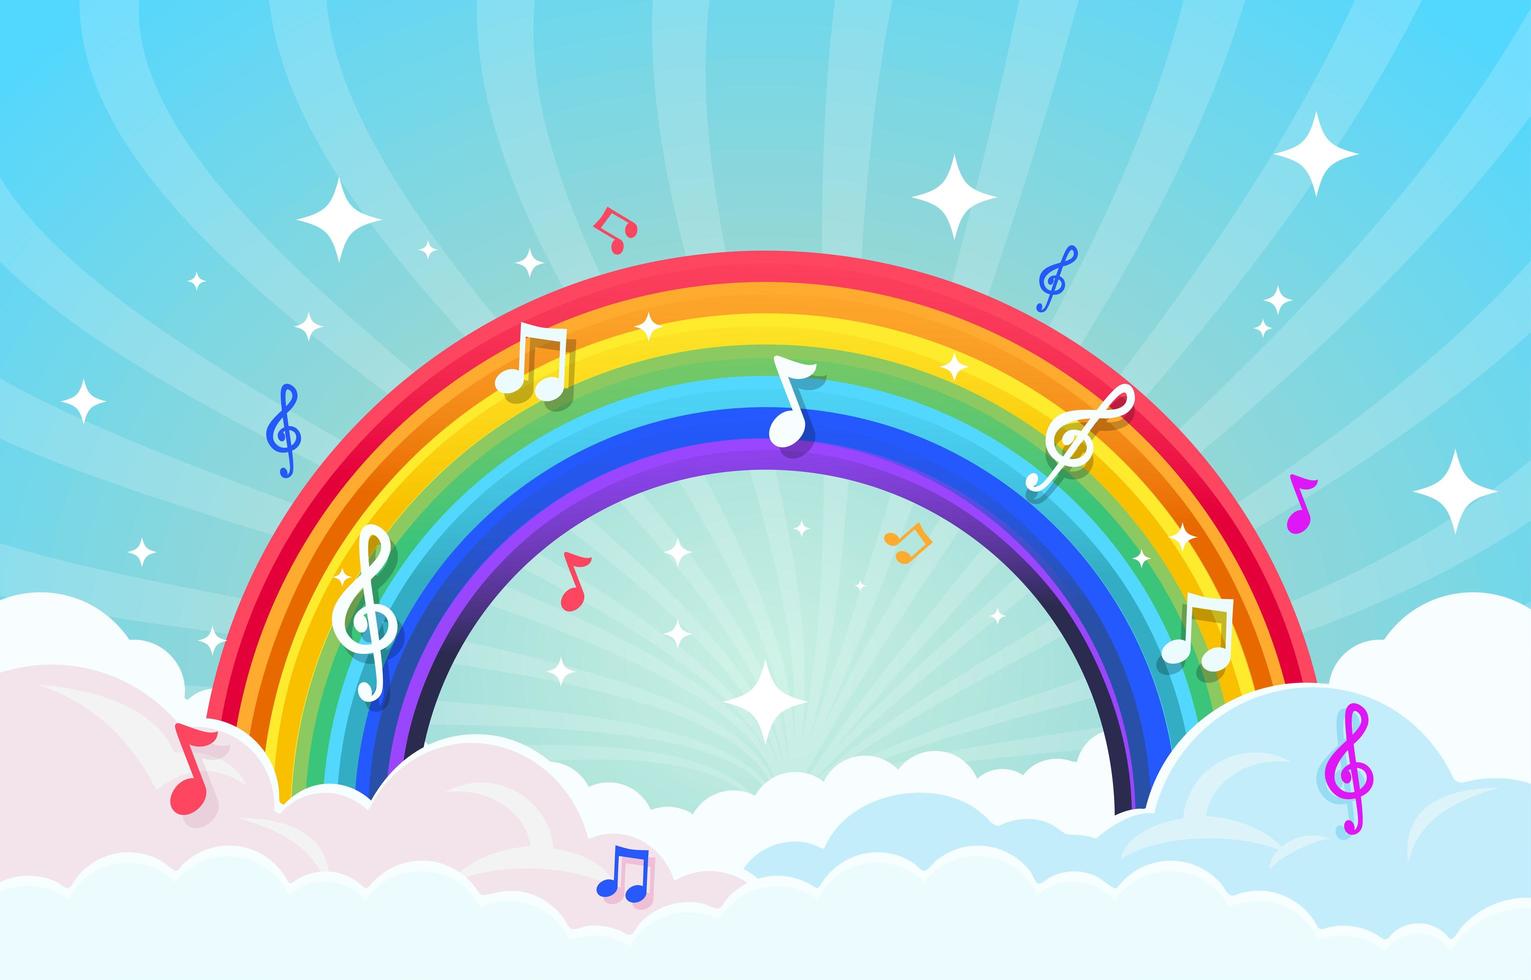 Musical Notes Around The Rainbow vector